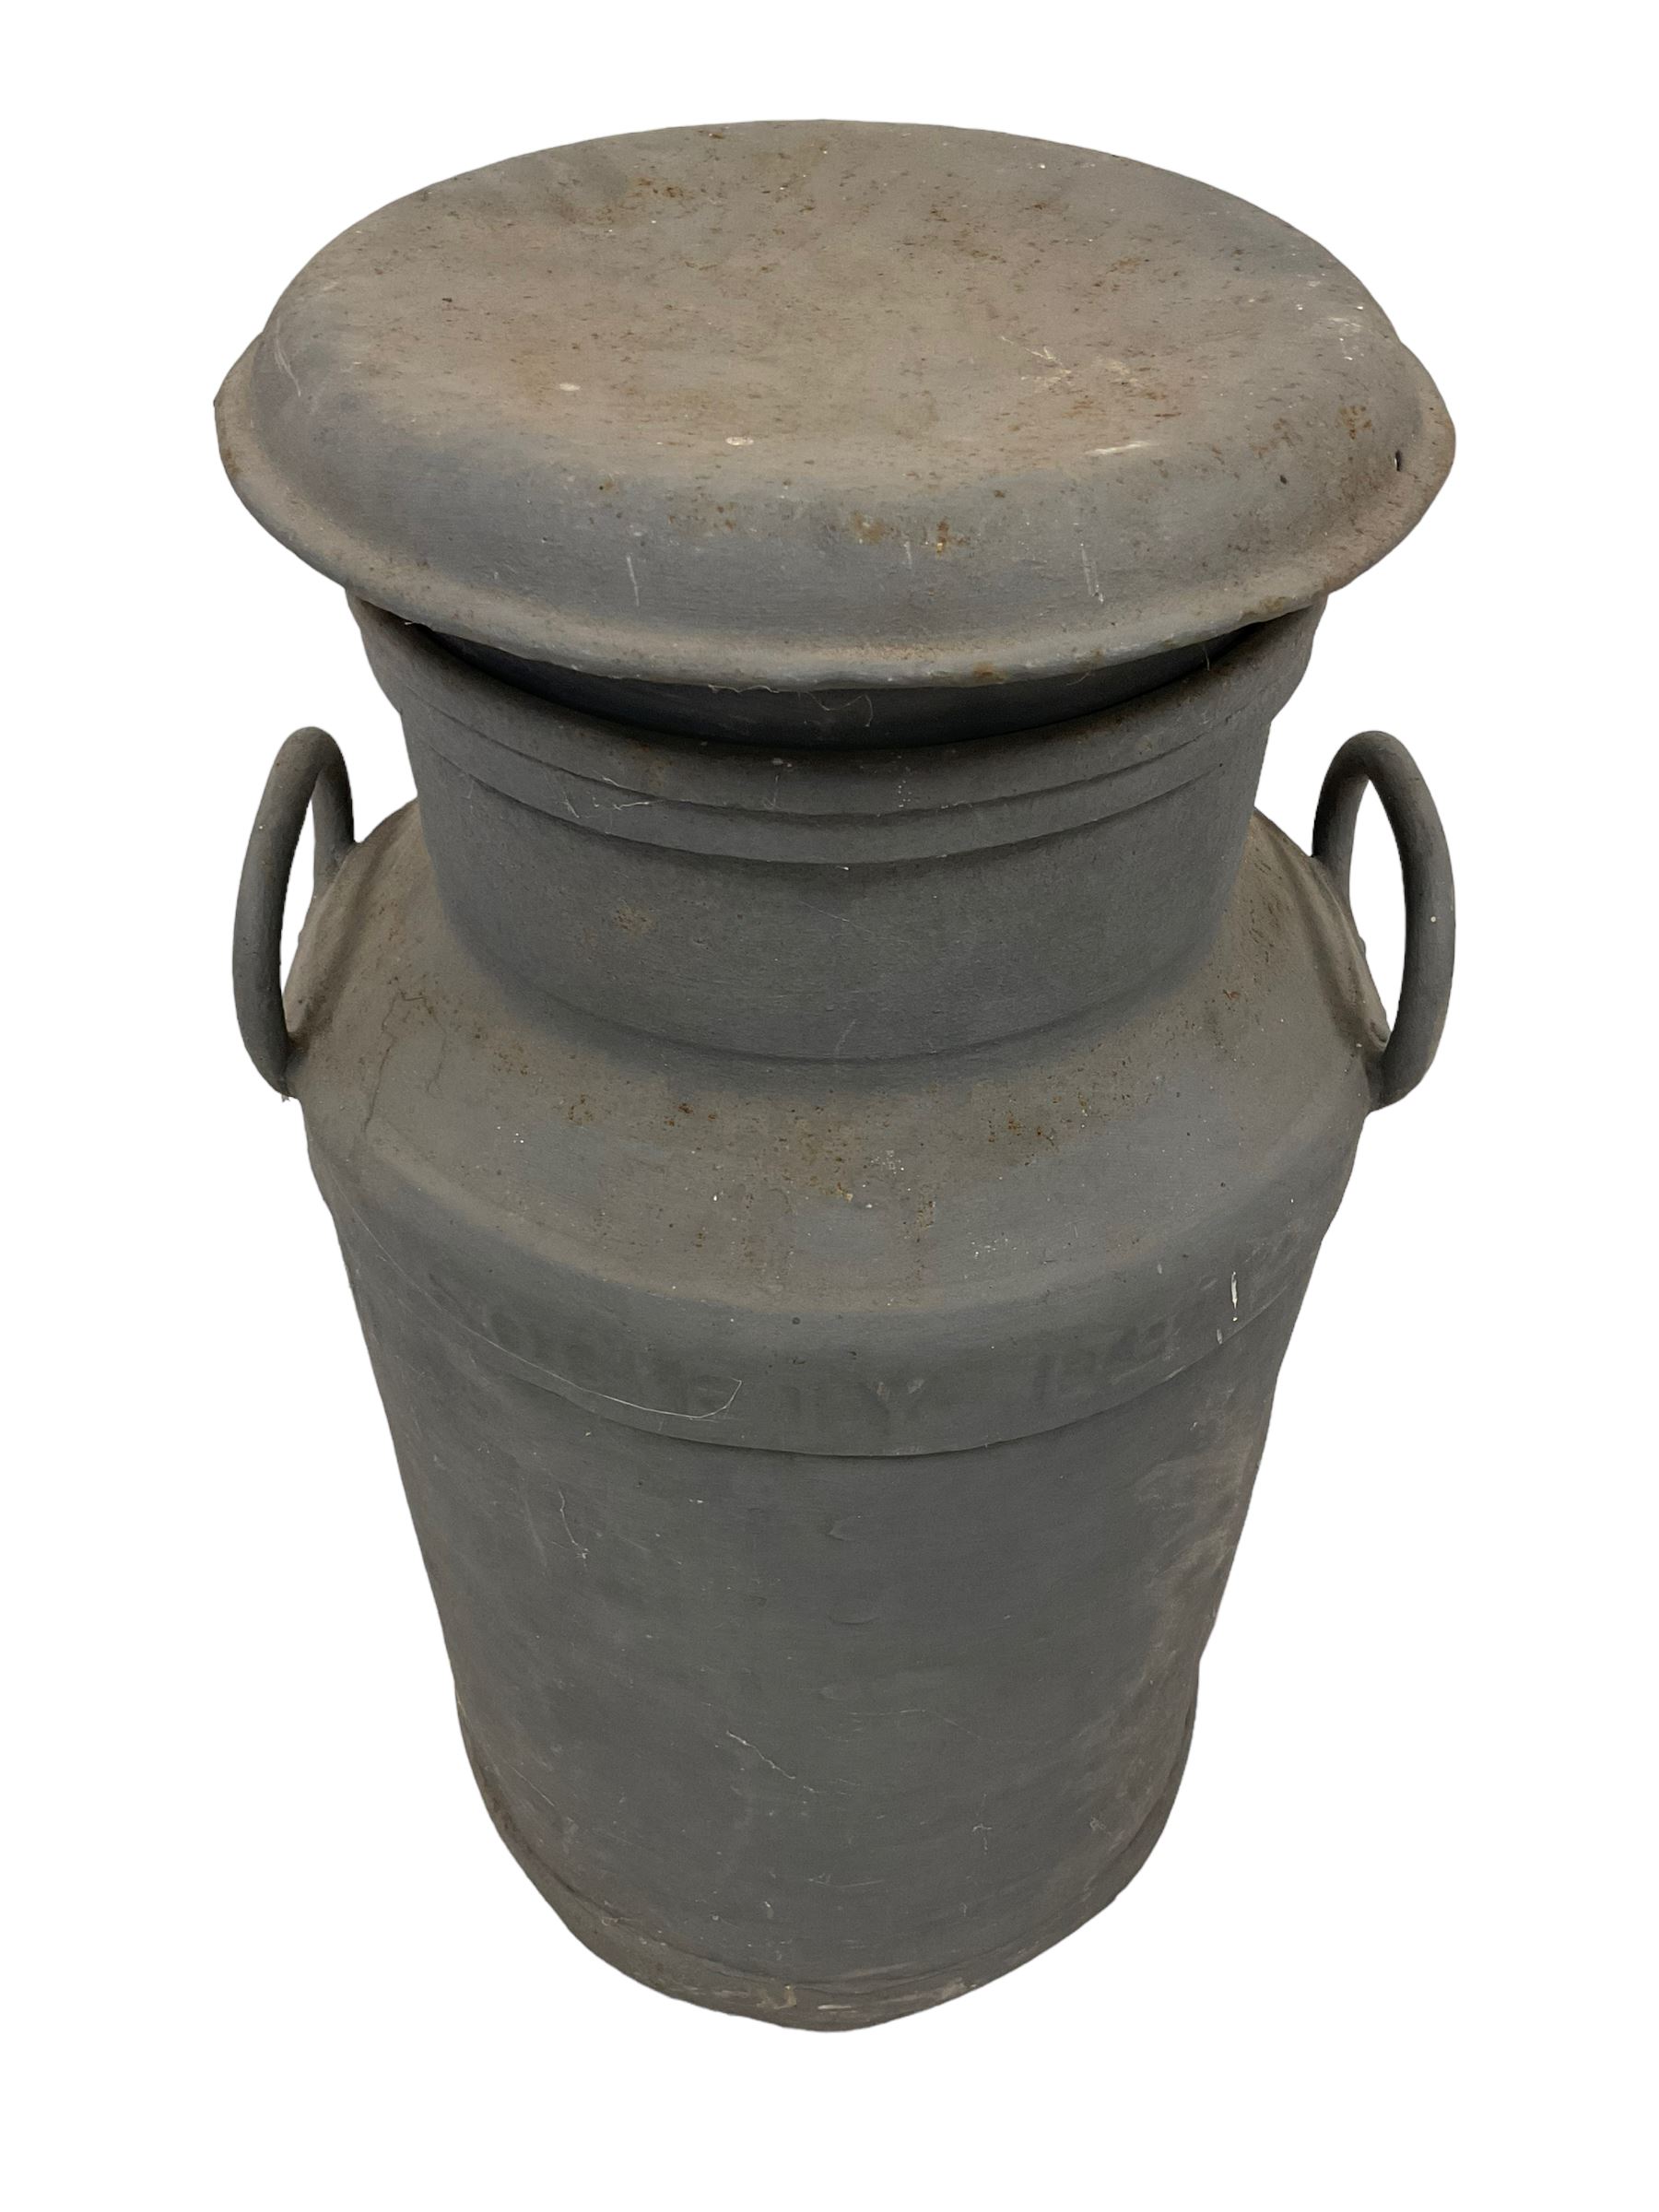 Co-op Wholesale Society Ltd - milk churn with lid and twin handles - Image 4 of 4